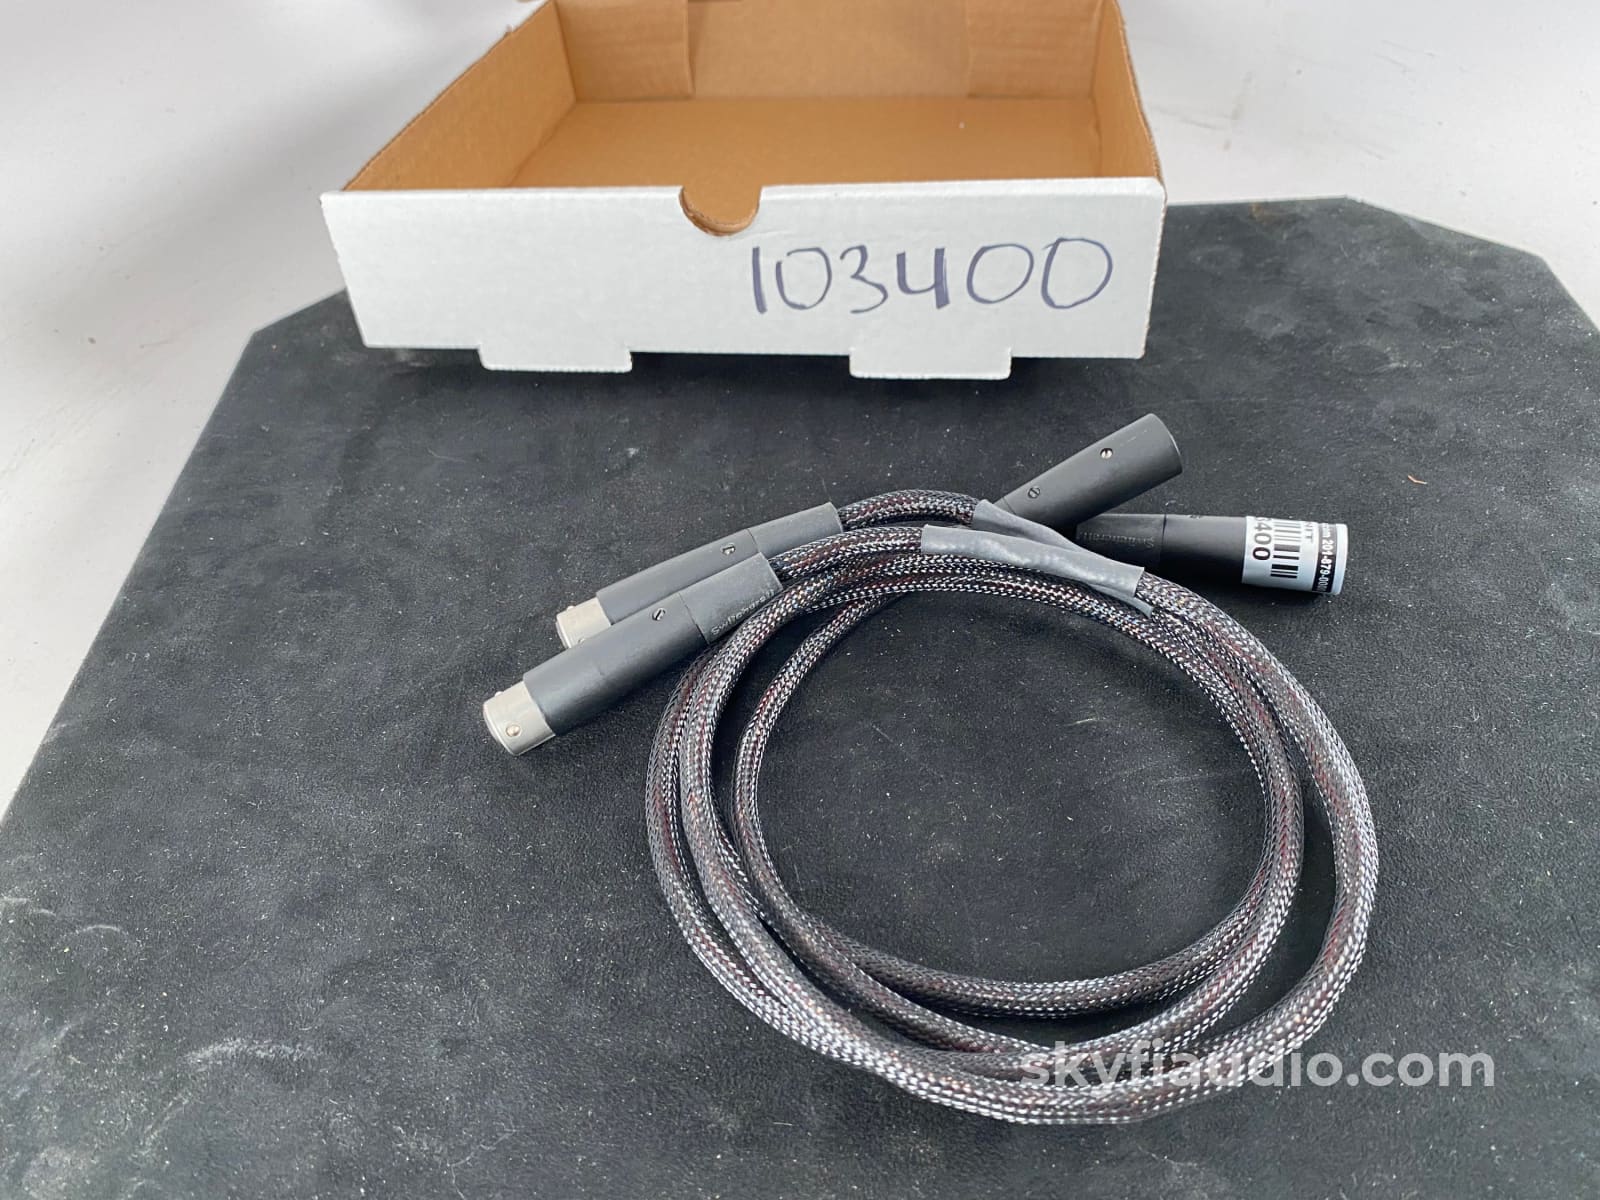 Kimber Kable Ascent Series - Hero Xlr Audio Interconnects 1M Cables